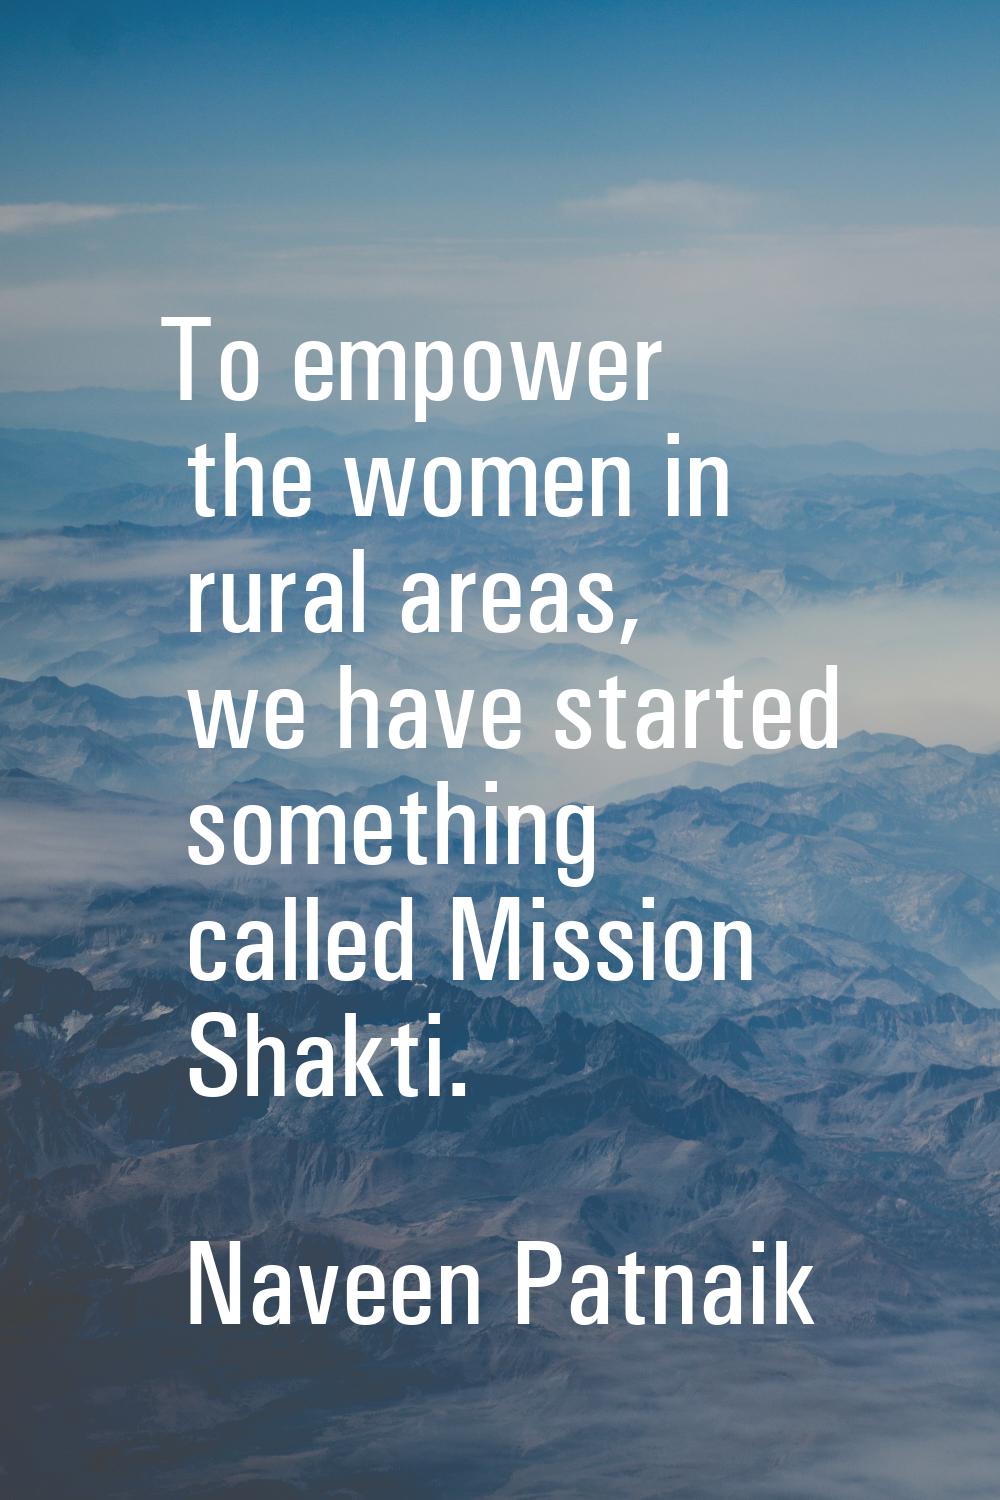 To empower the women in rural areas, we have started something called Mission Shakti.